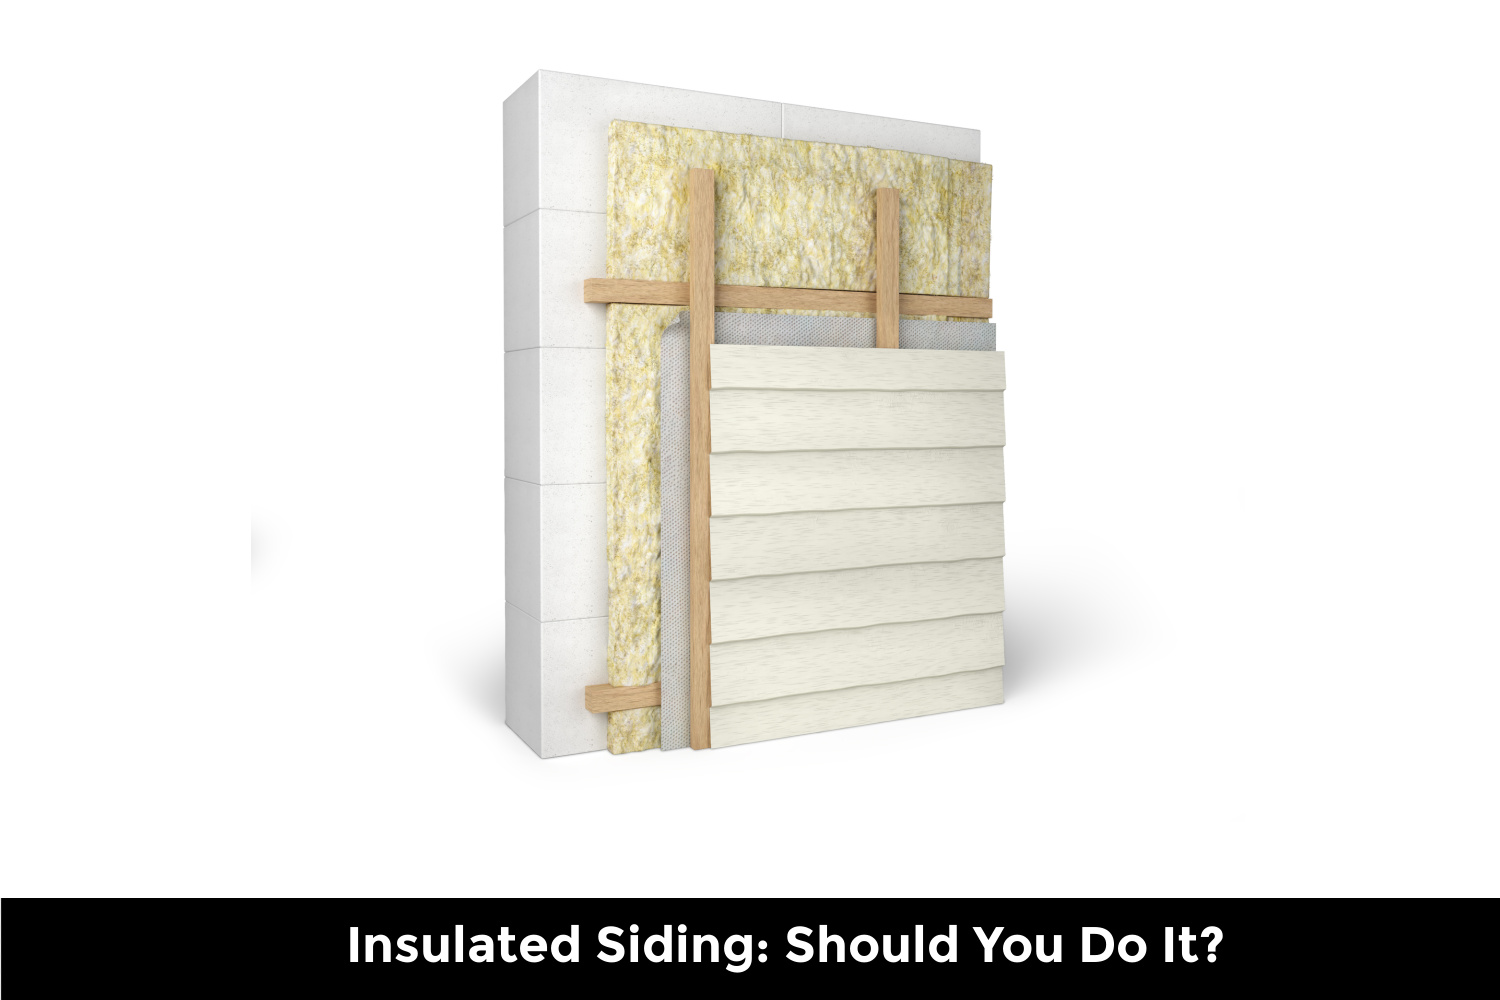 Insulated Siding: Should You Do It?